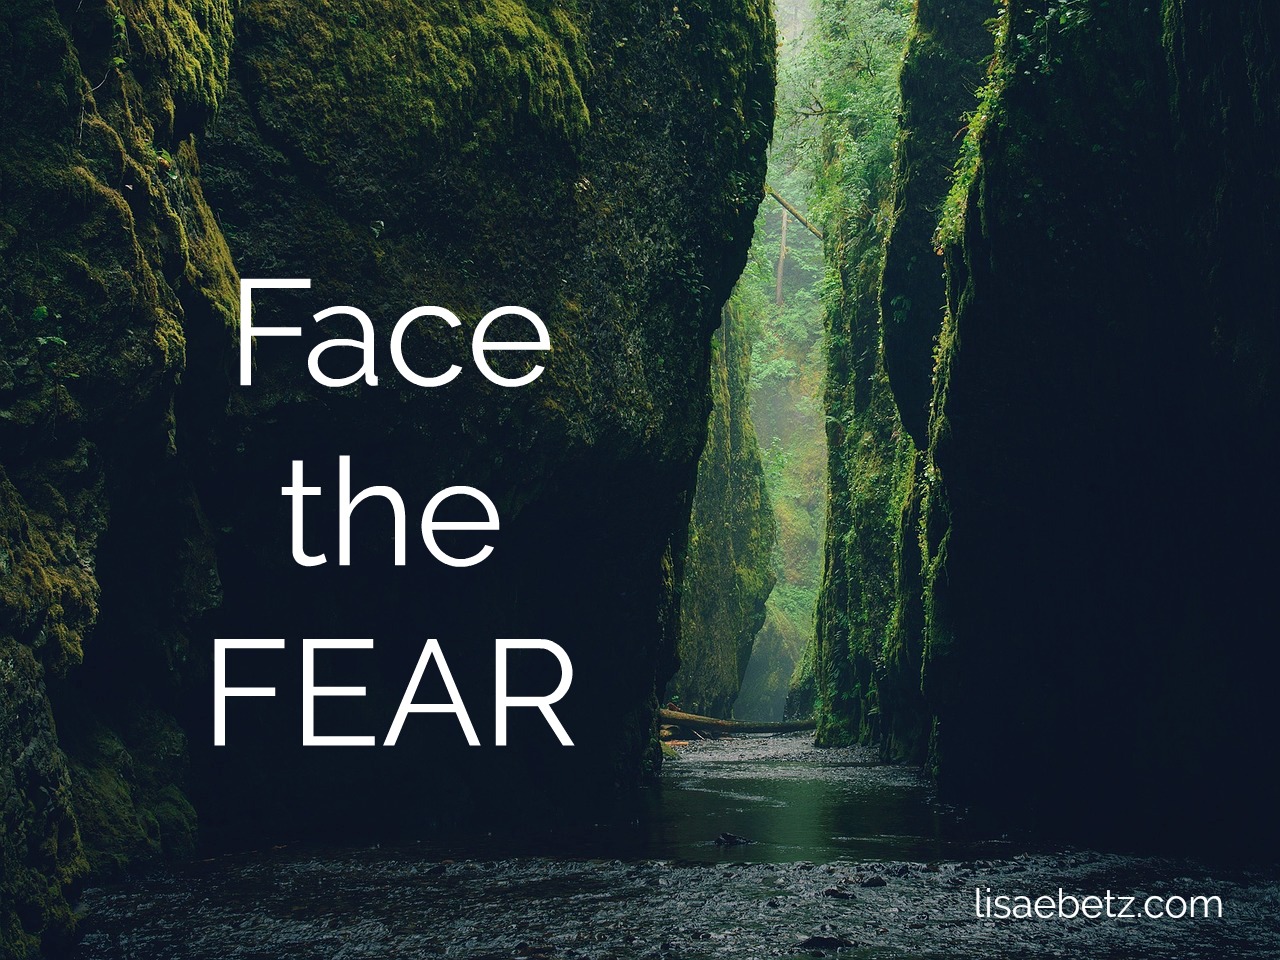 Are You Ready to Face the Fear?